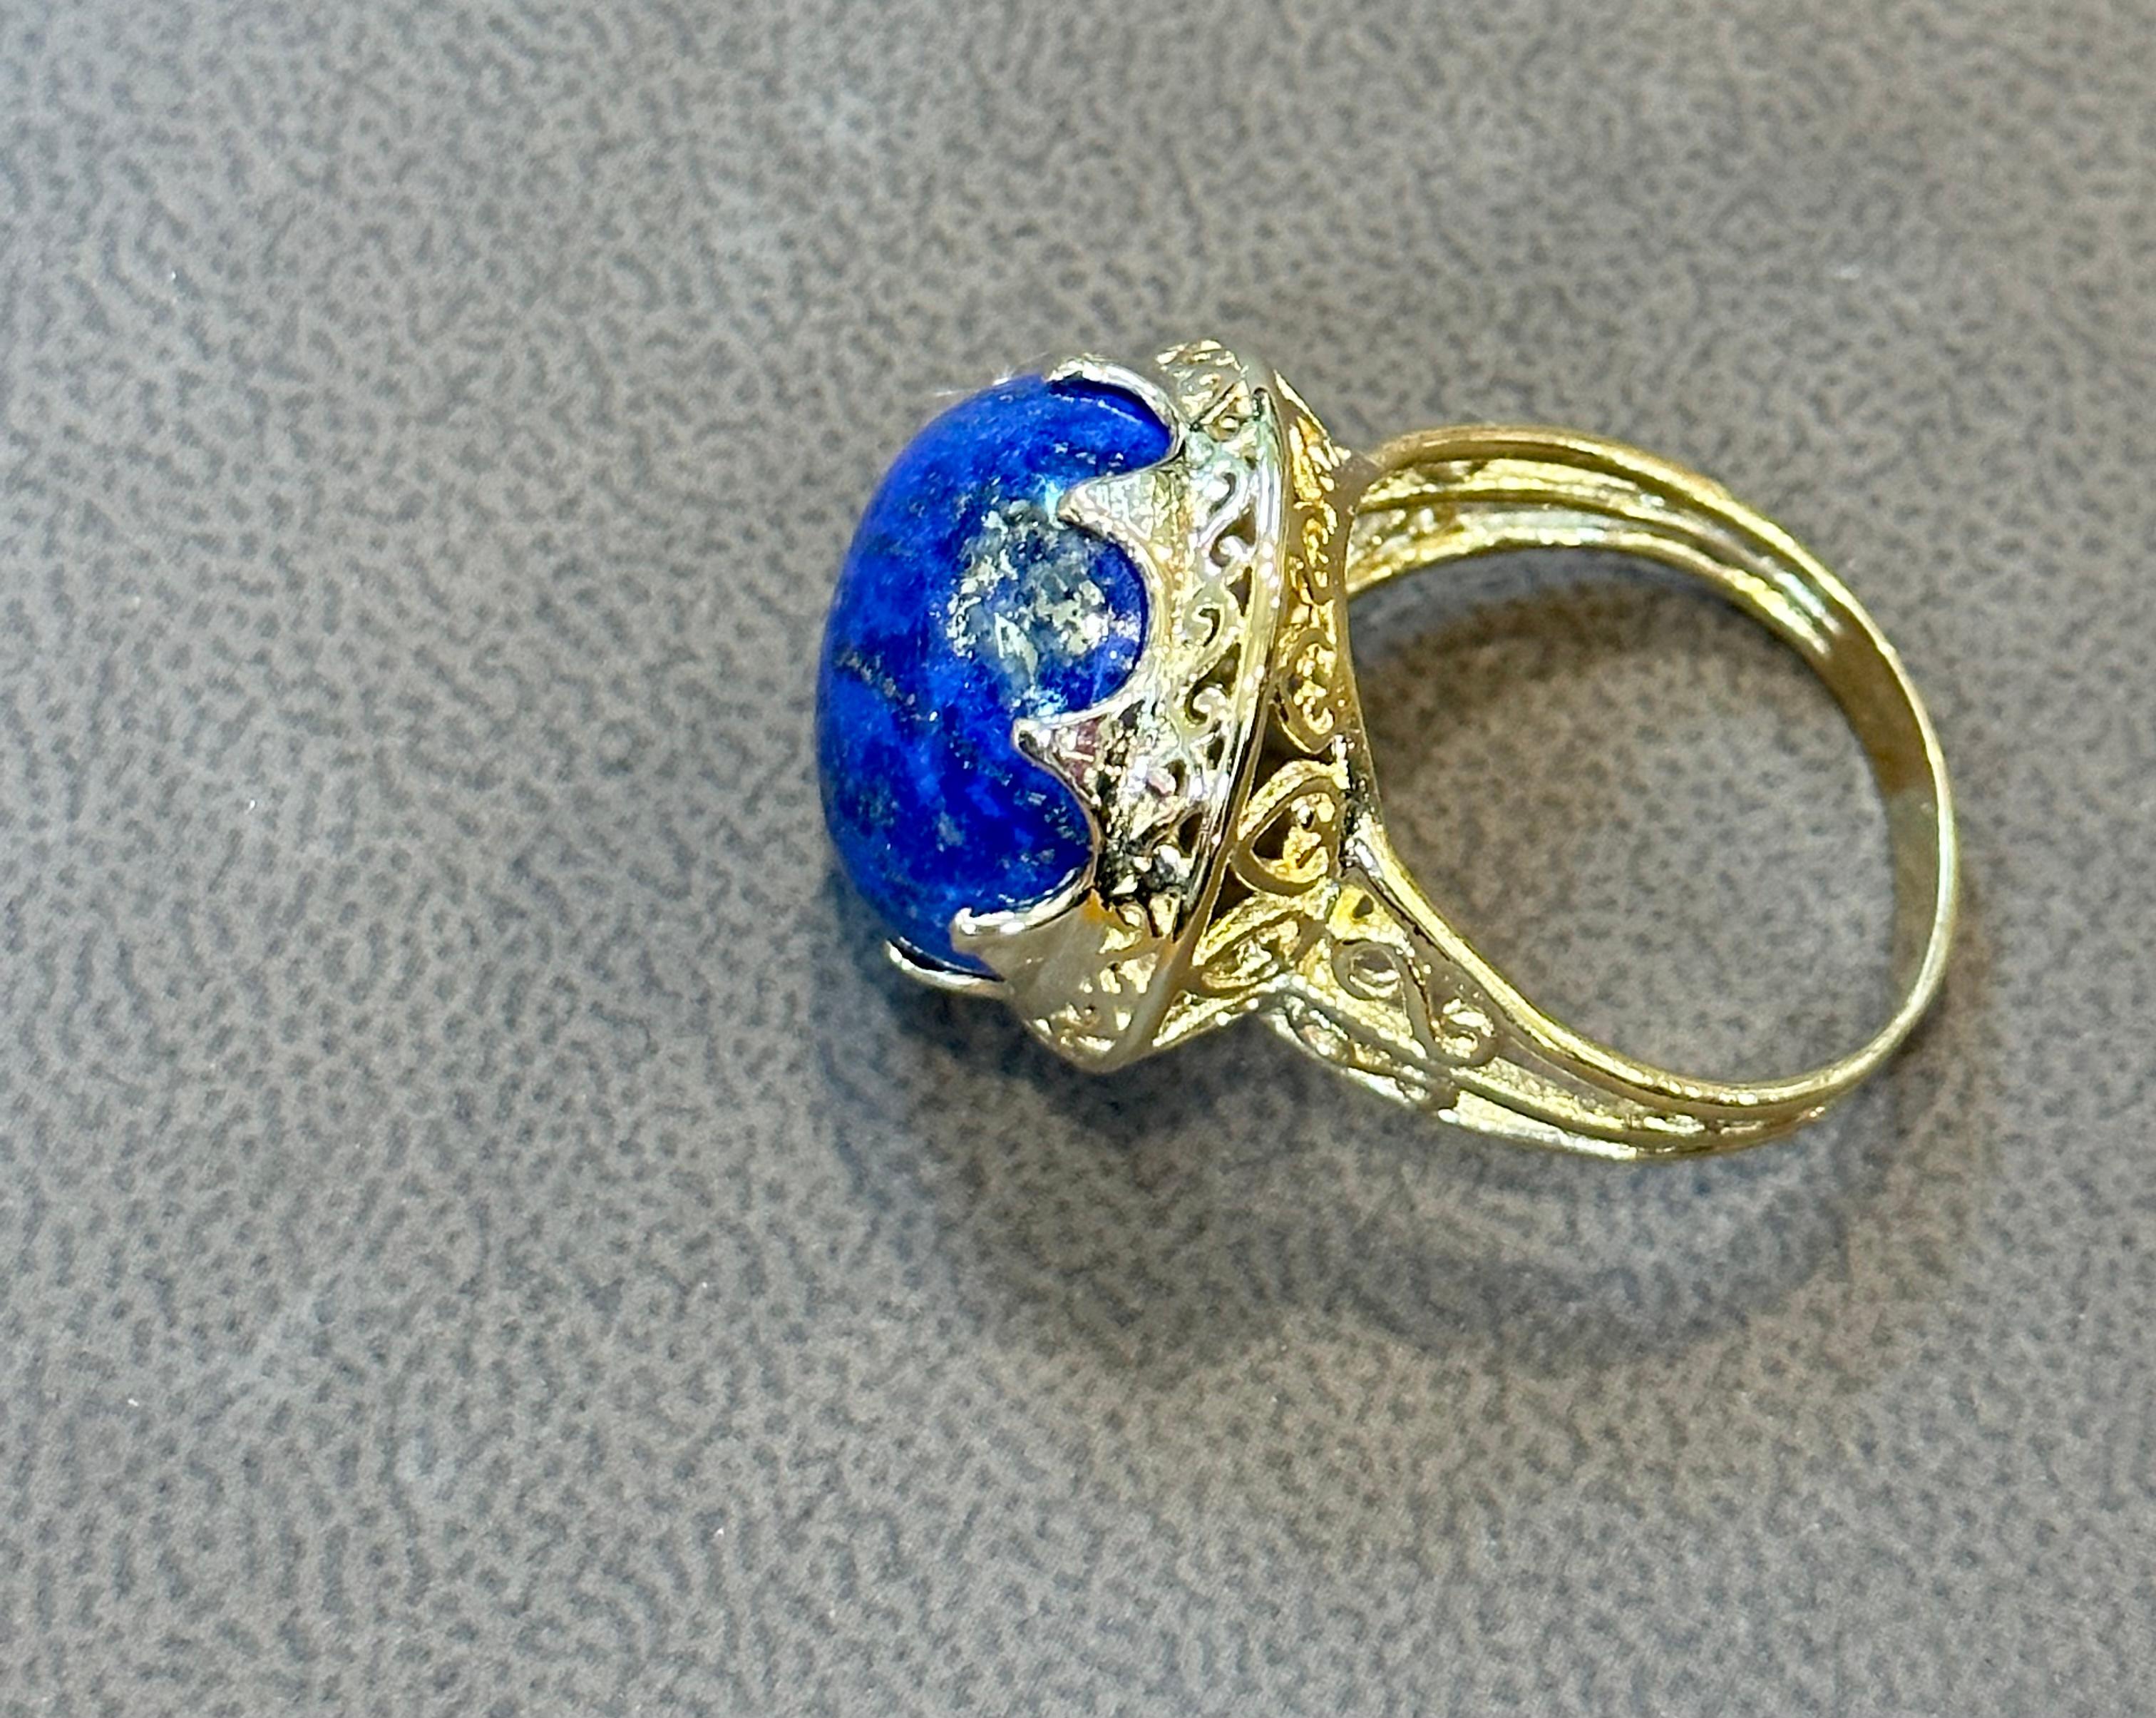 18 Ct Round Natural Cabochon Lapis Lazuli Ring in 14 Kt Yellow Gold, Estate For Sale 2